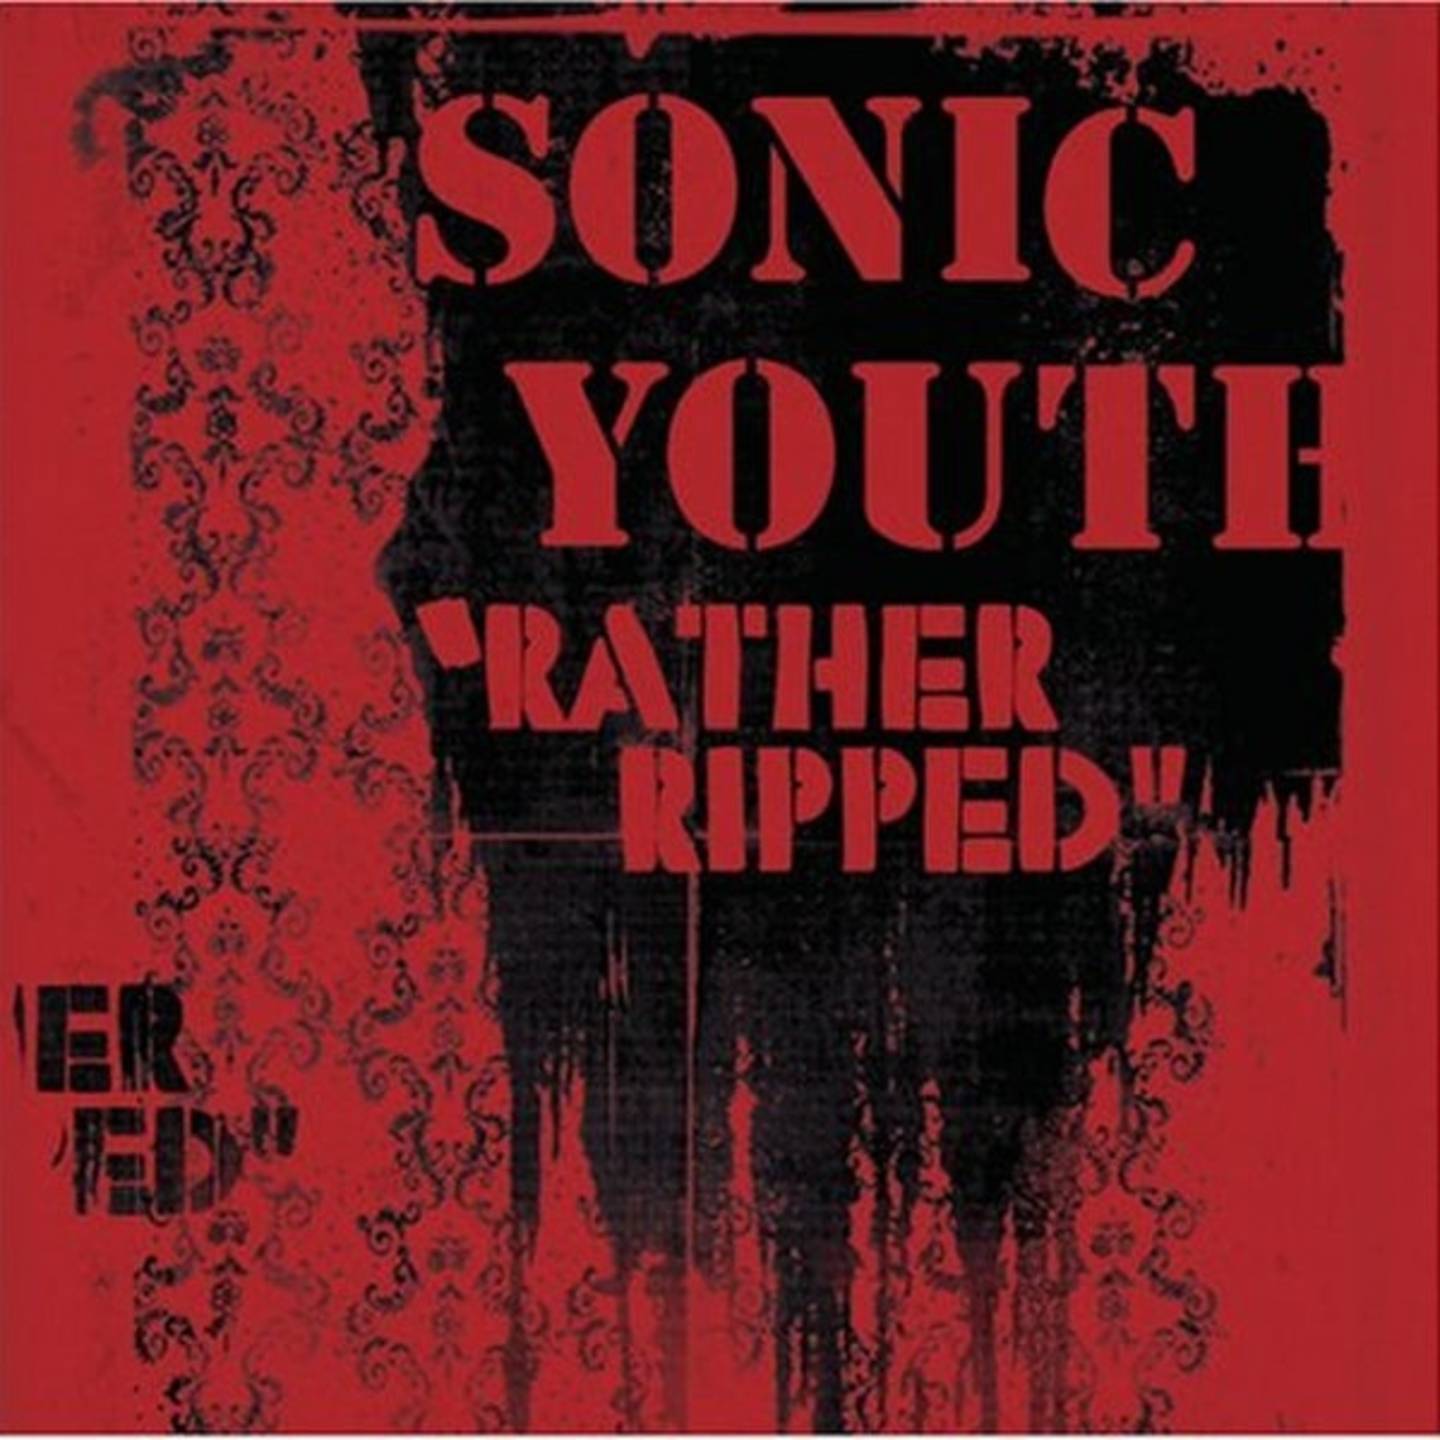 SONIC YOUTH - Rather Ripped LP